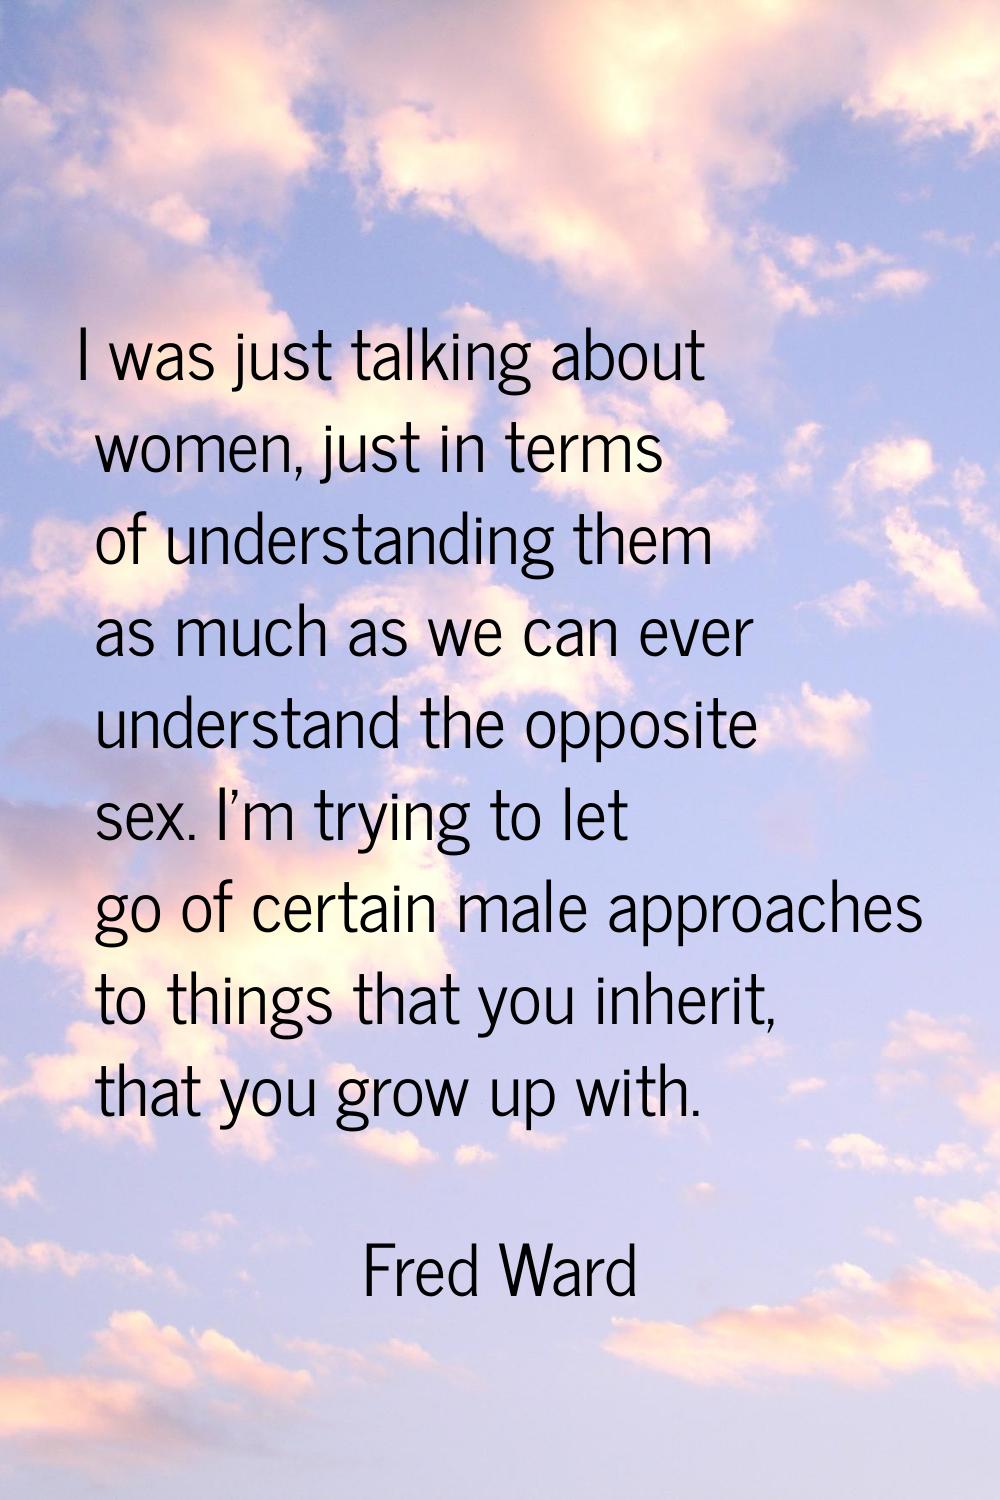 I was just talking about women, just in terms of understanding them as much as we can ever understa